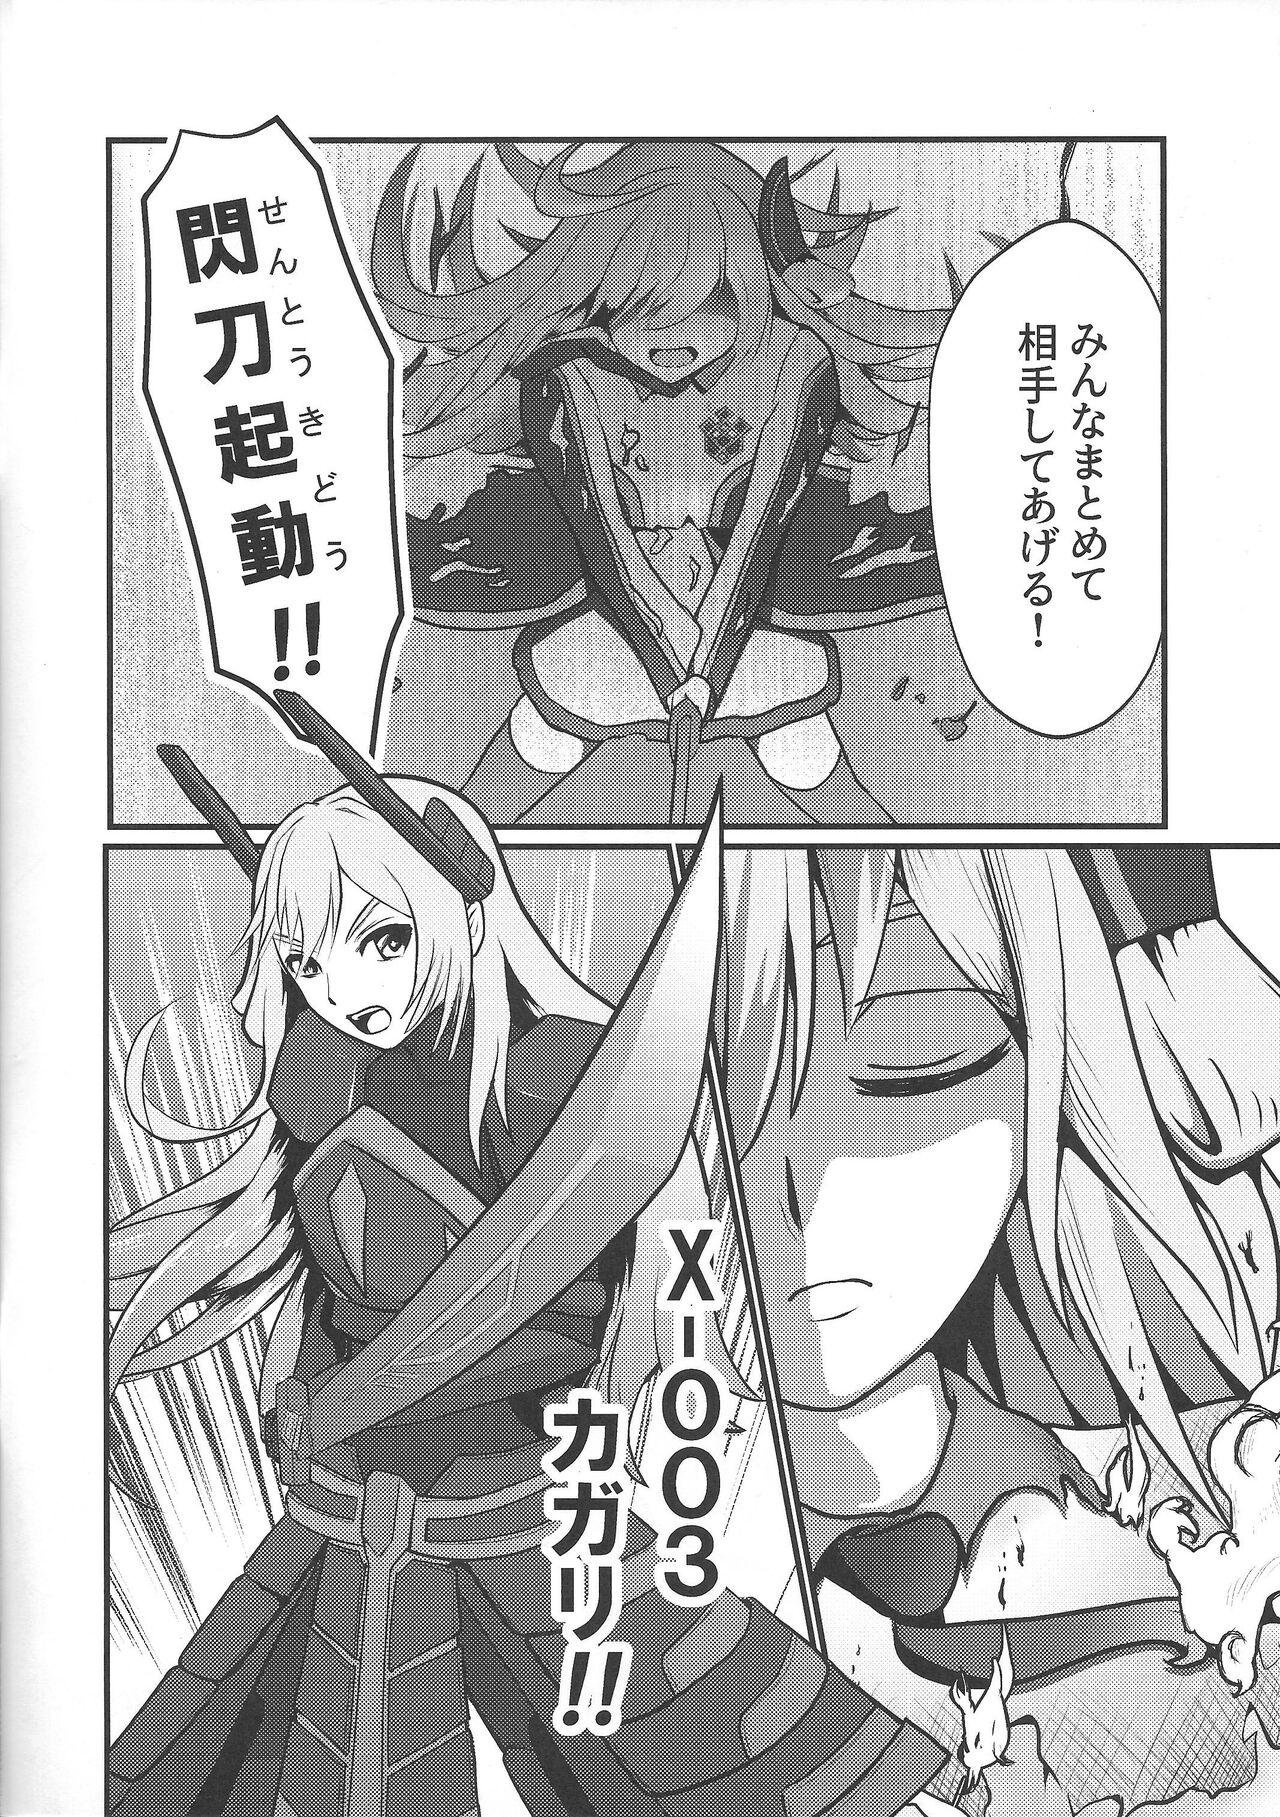 Stepbrother Sento hime seigen kaijo - Yu gi oh Freckles - Page 3